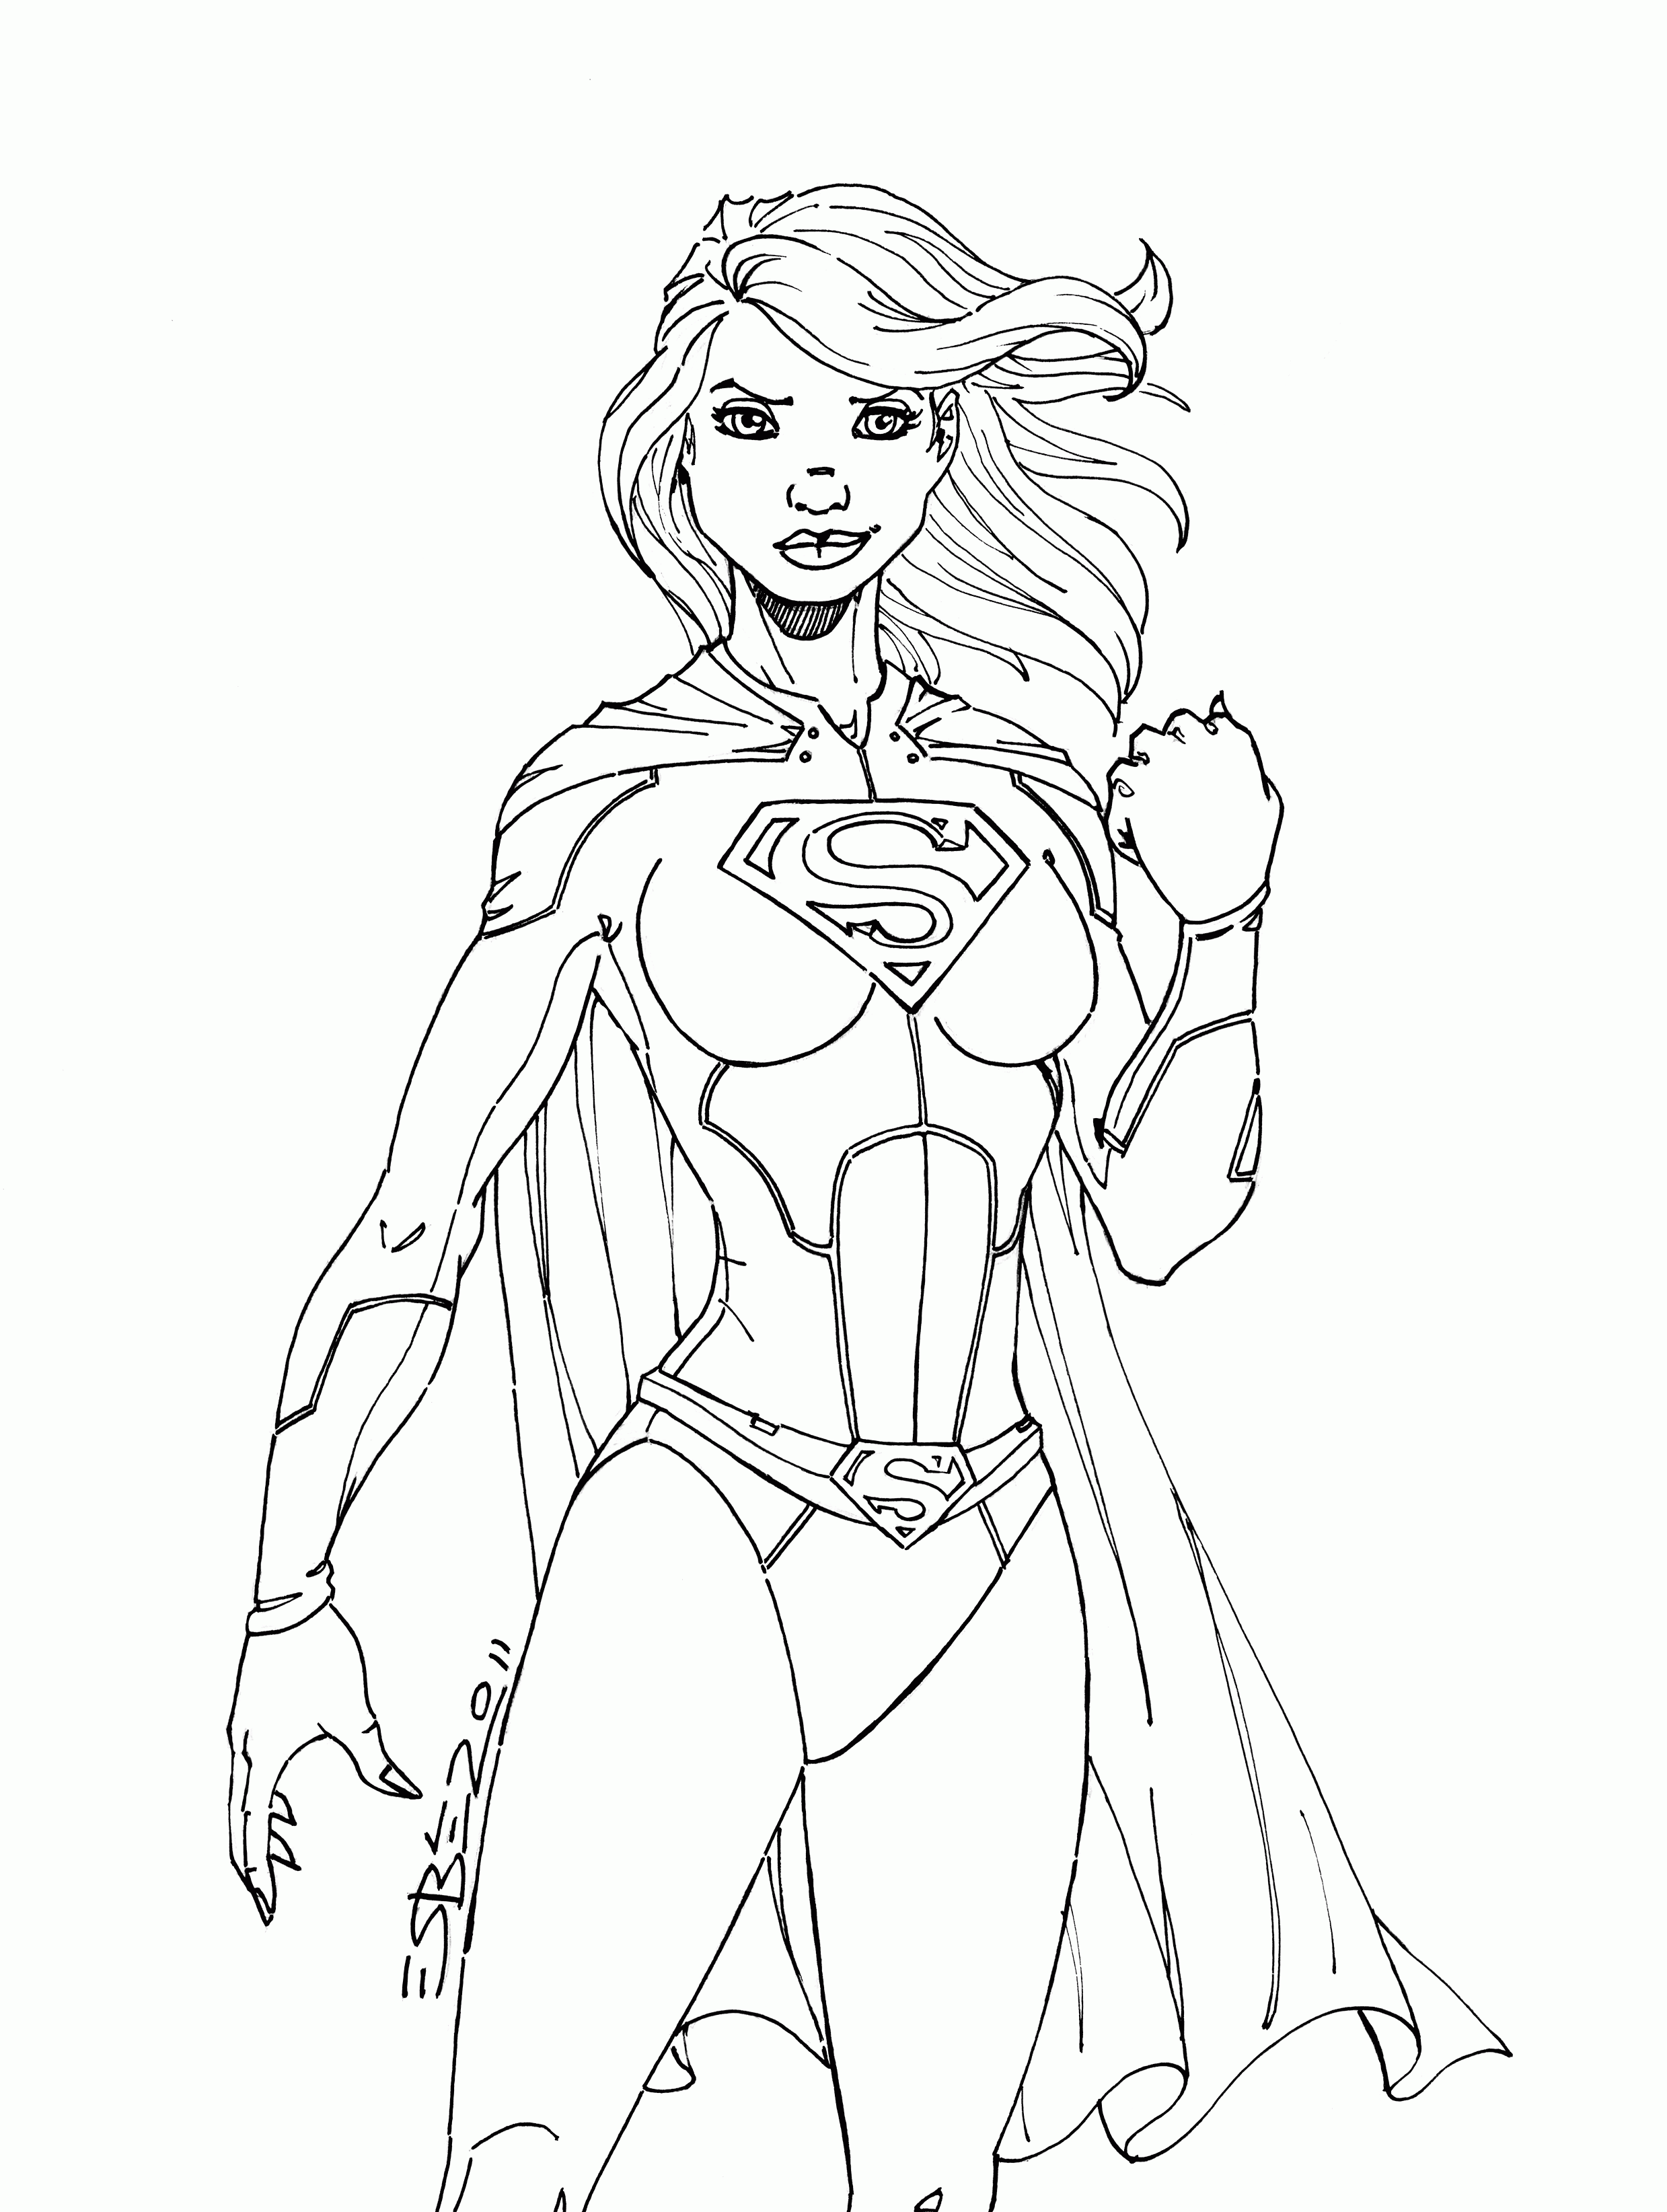 Supergirl Colouring - Coloring Pages for Kids and for Adults